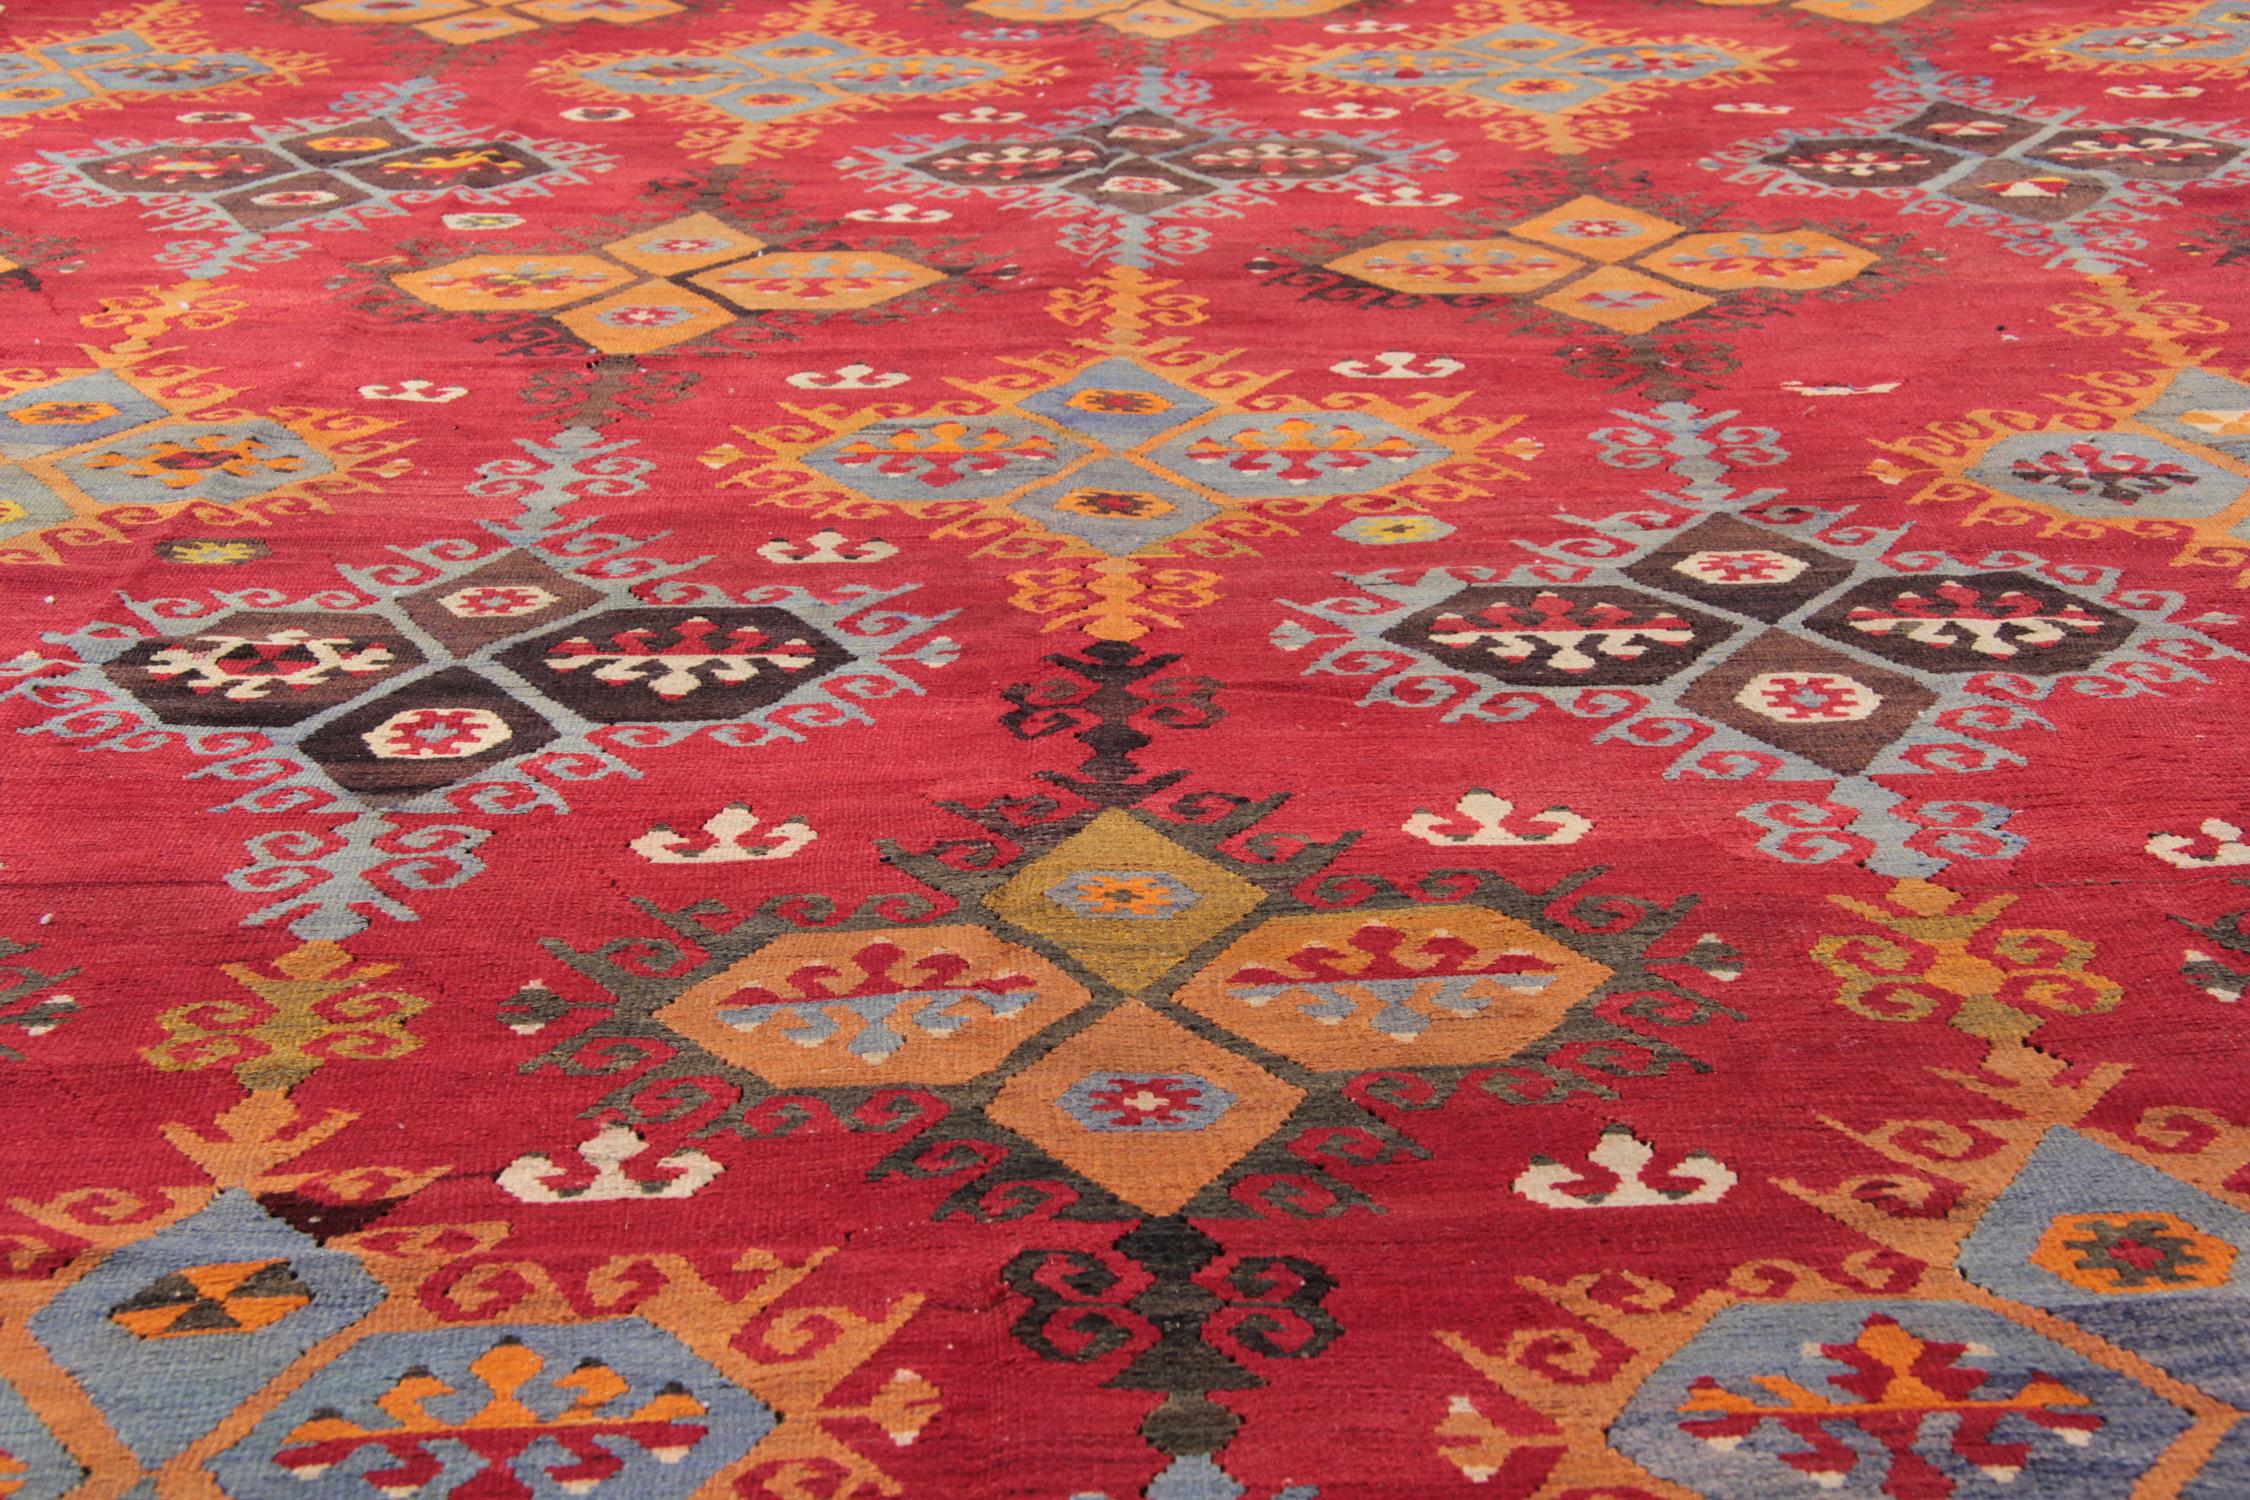 This Fantastic Red Turkish Kilim Rug has been beautifully Hand-made, Hand-Woven and dyed using traditional vegetable dyes to create one of the finest examples of antique kilim rugs. Featuring highly detailed symmetrical patterns across the rug and